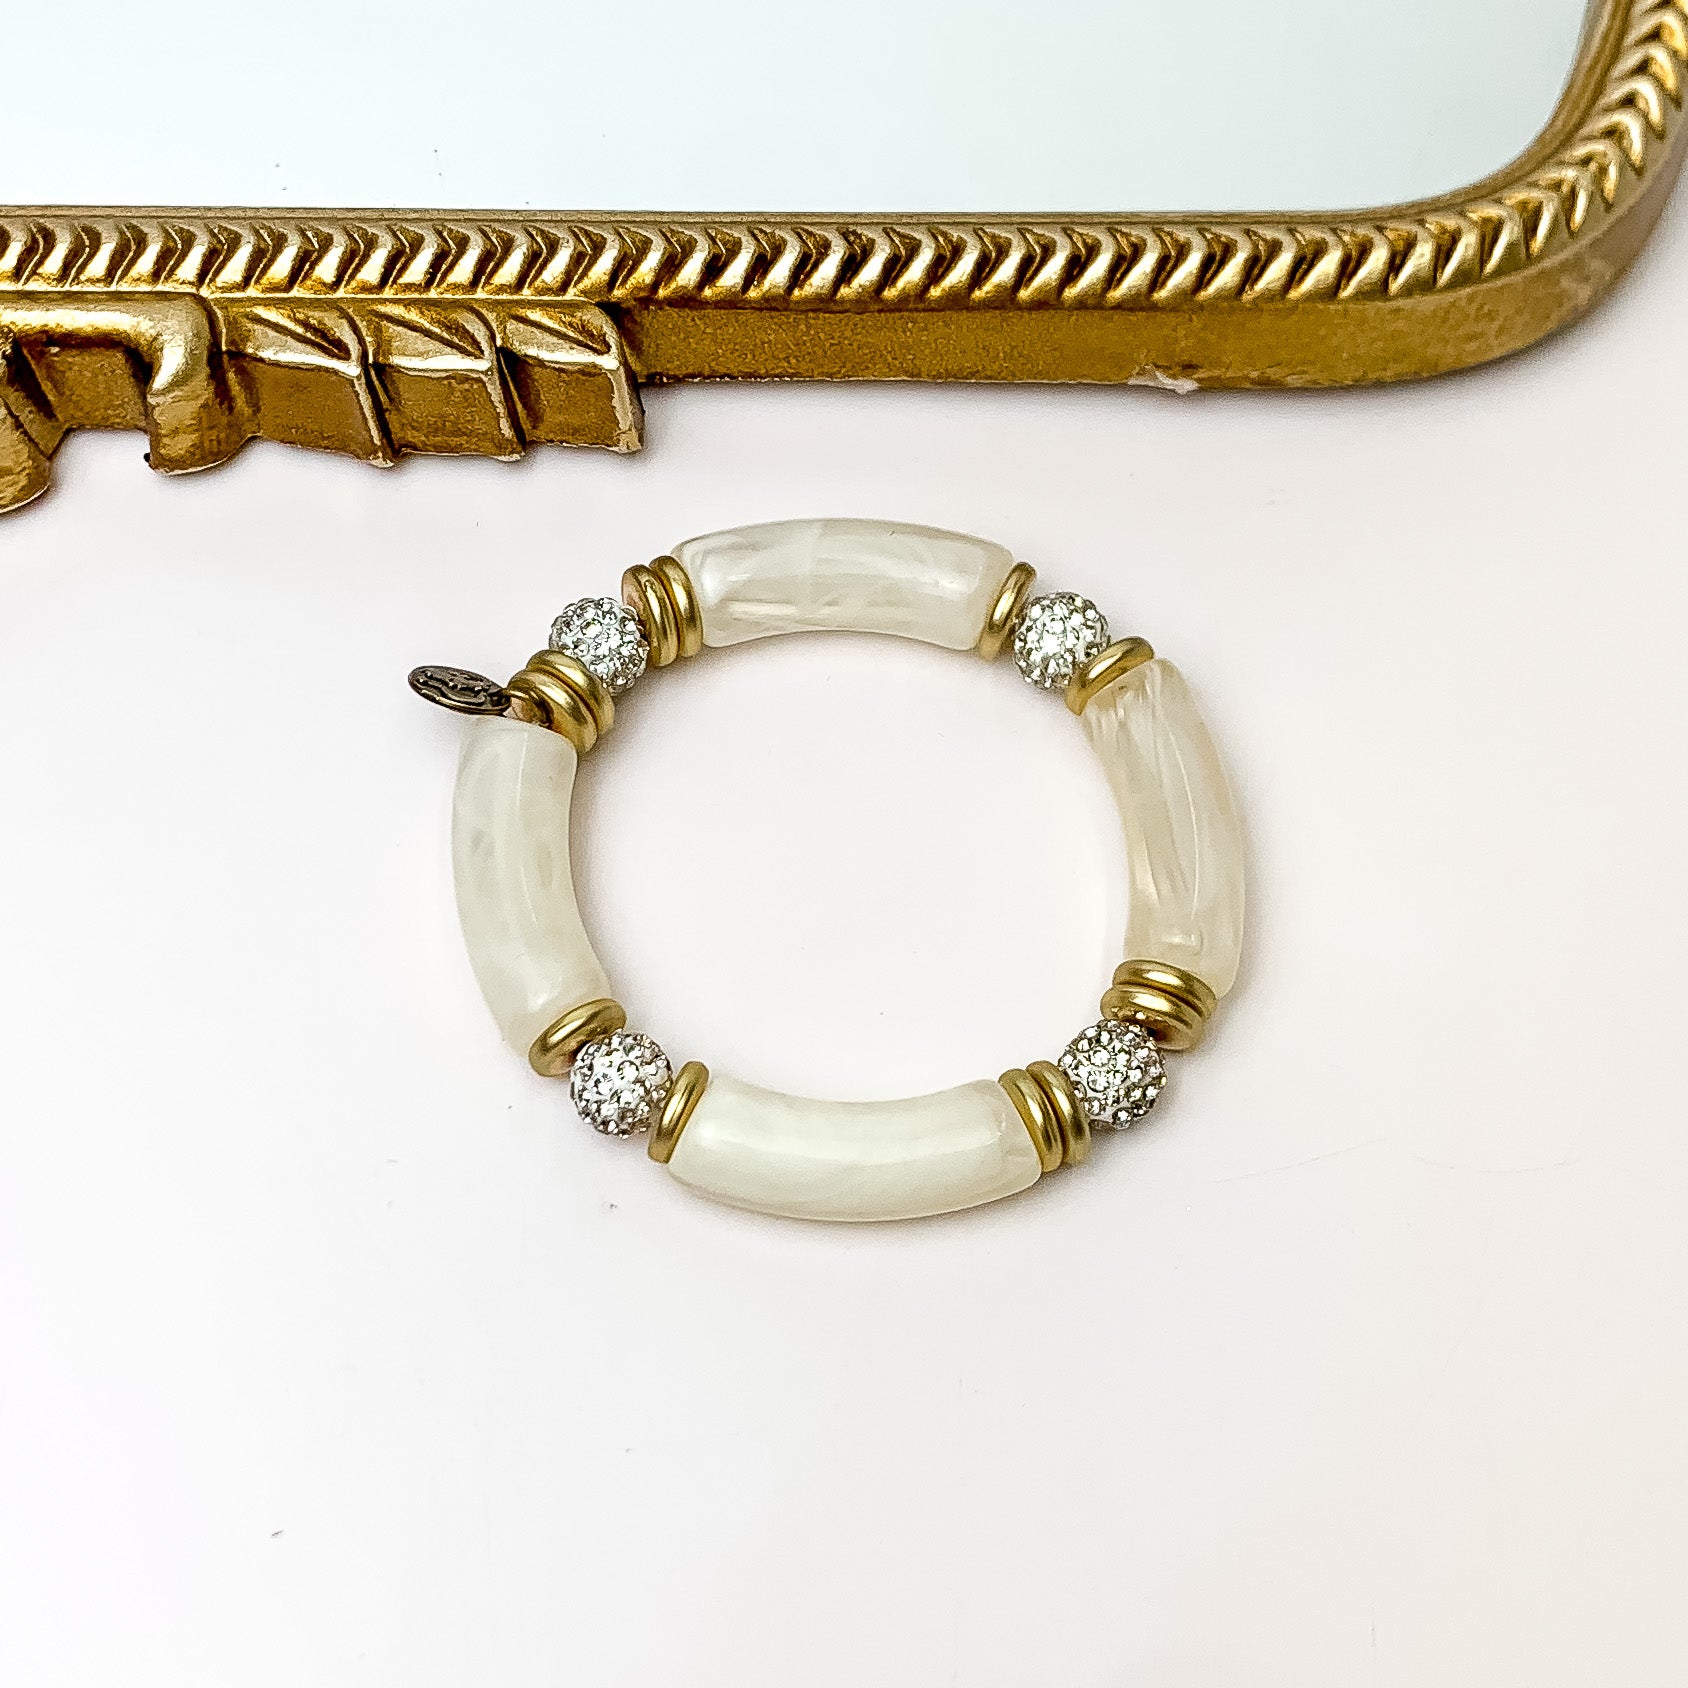 Pictured is one bracelet that has ivory bamboo beads, gold beads, and clear crystal beads. This bracelet is pictured in front of a gold mirror on a white background. 